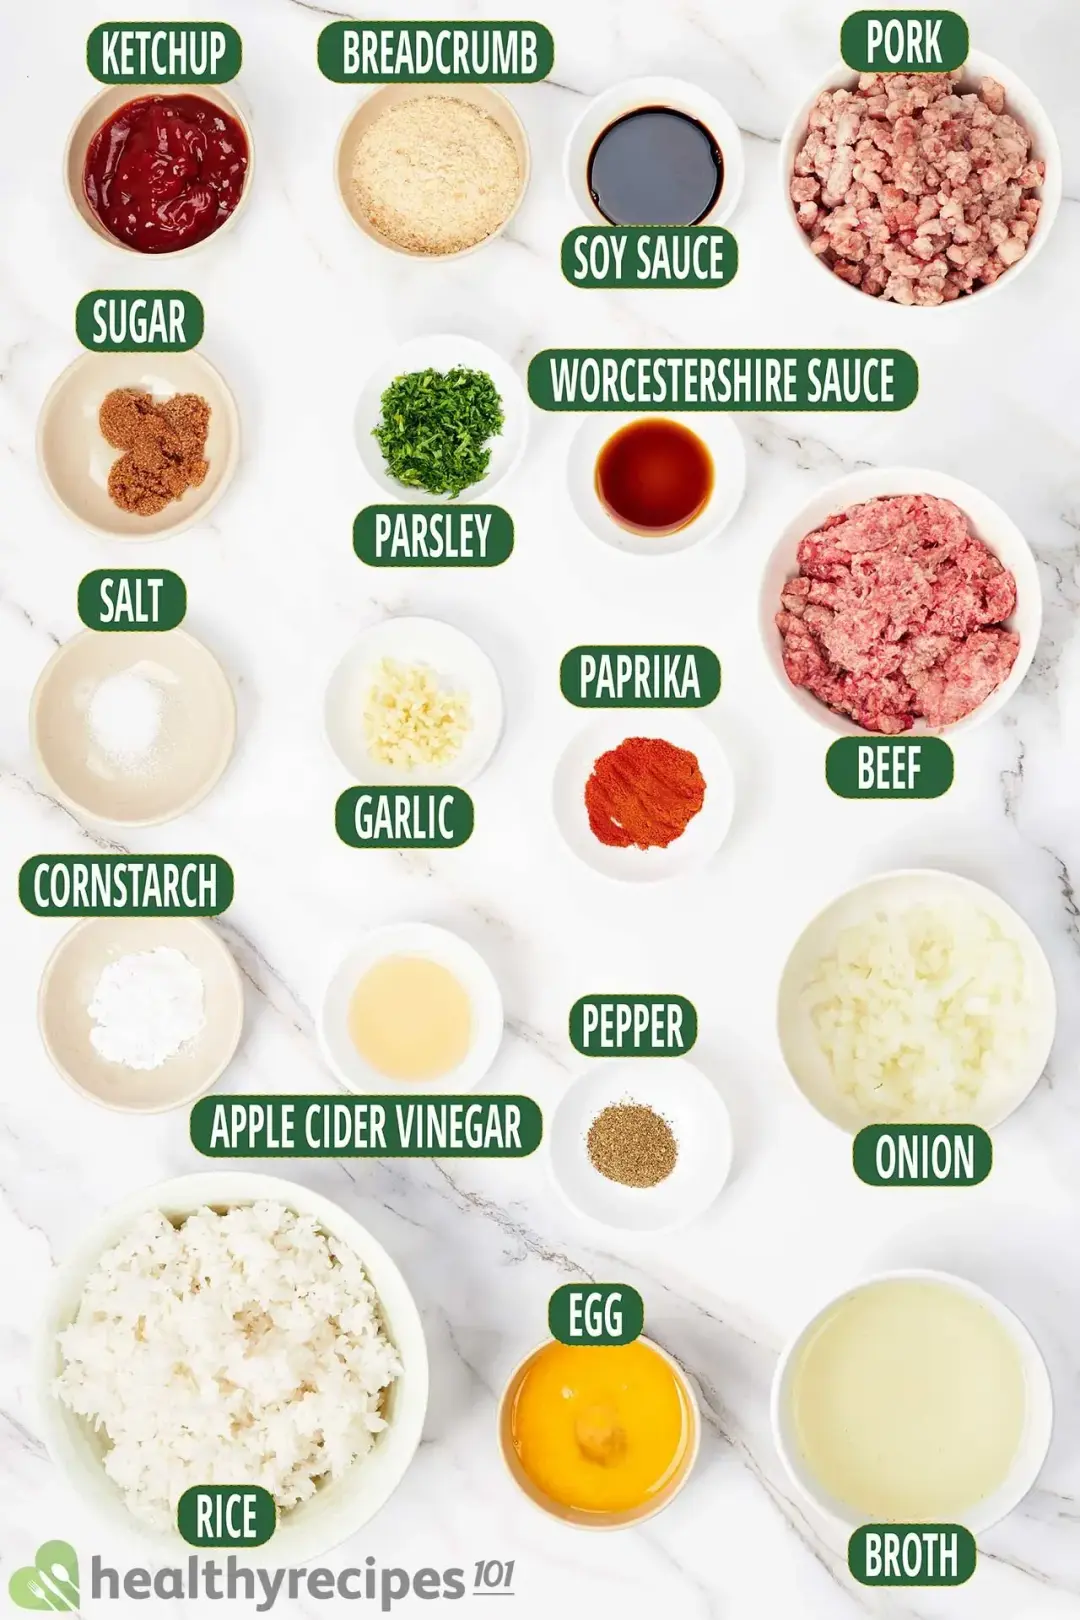 ingredients for the meatballs